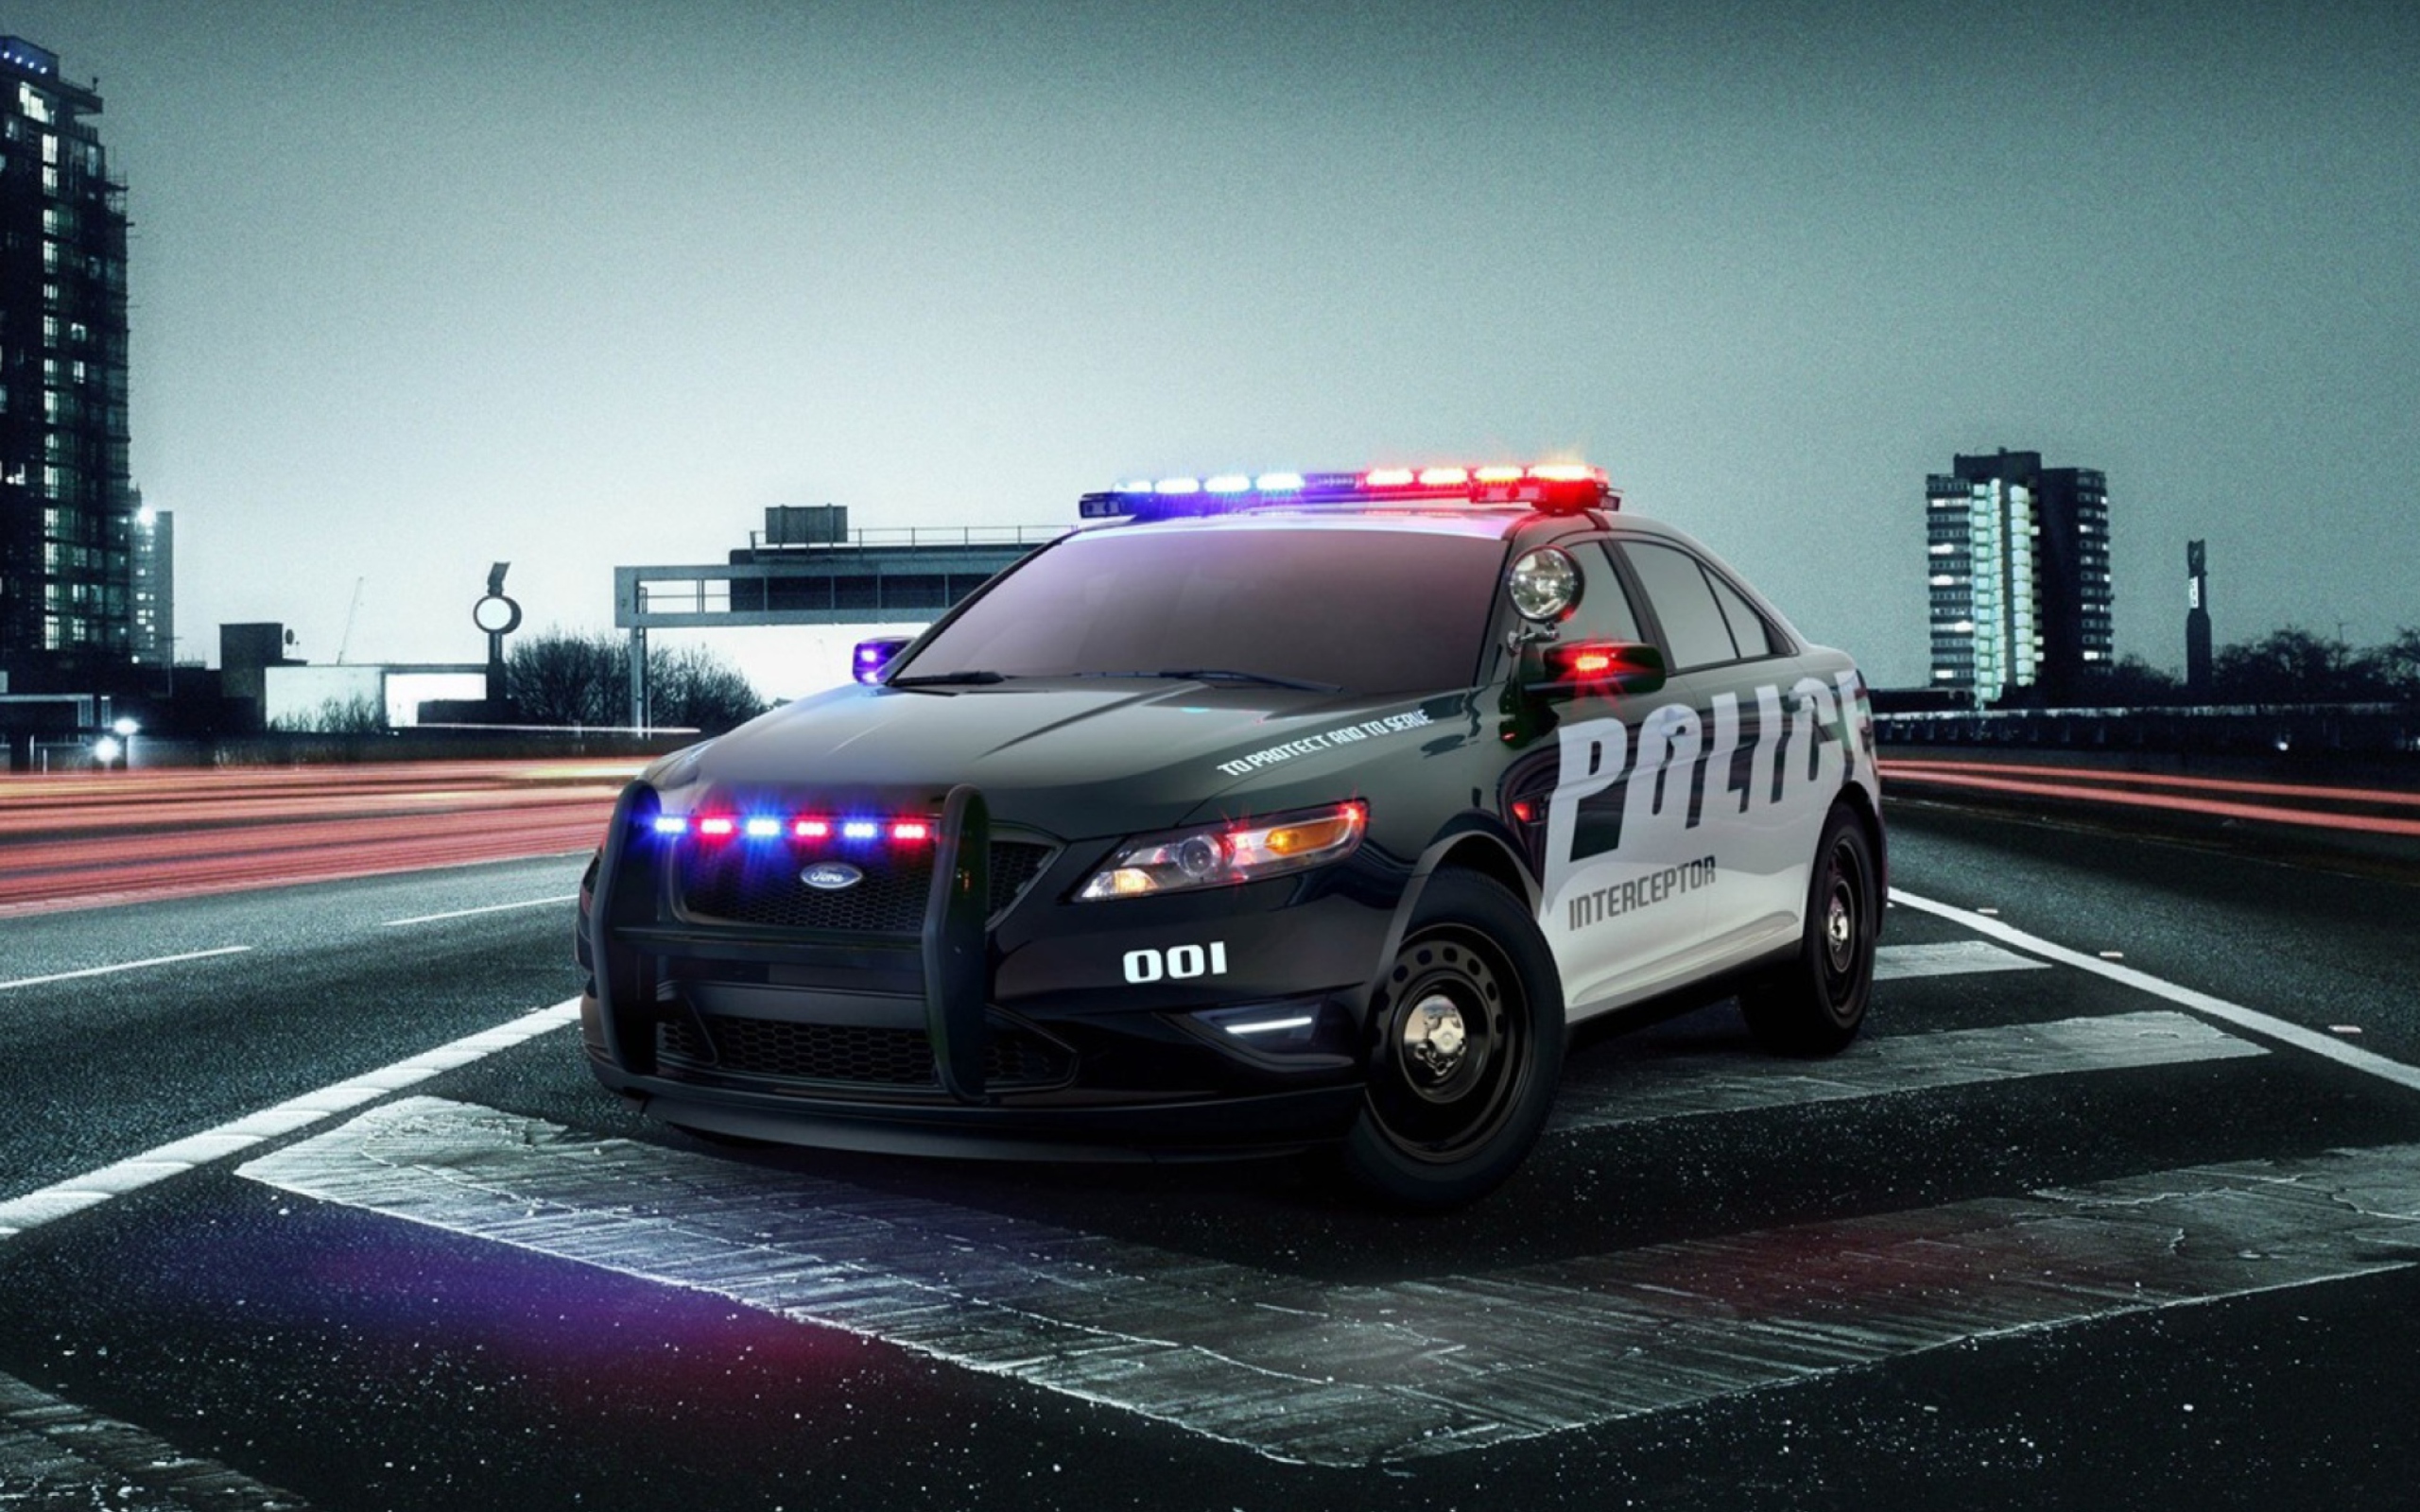 Ford Police Car wallpaper 2560x1600